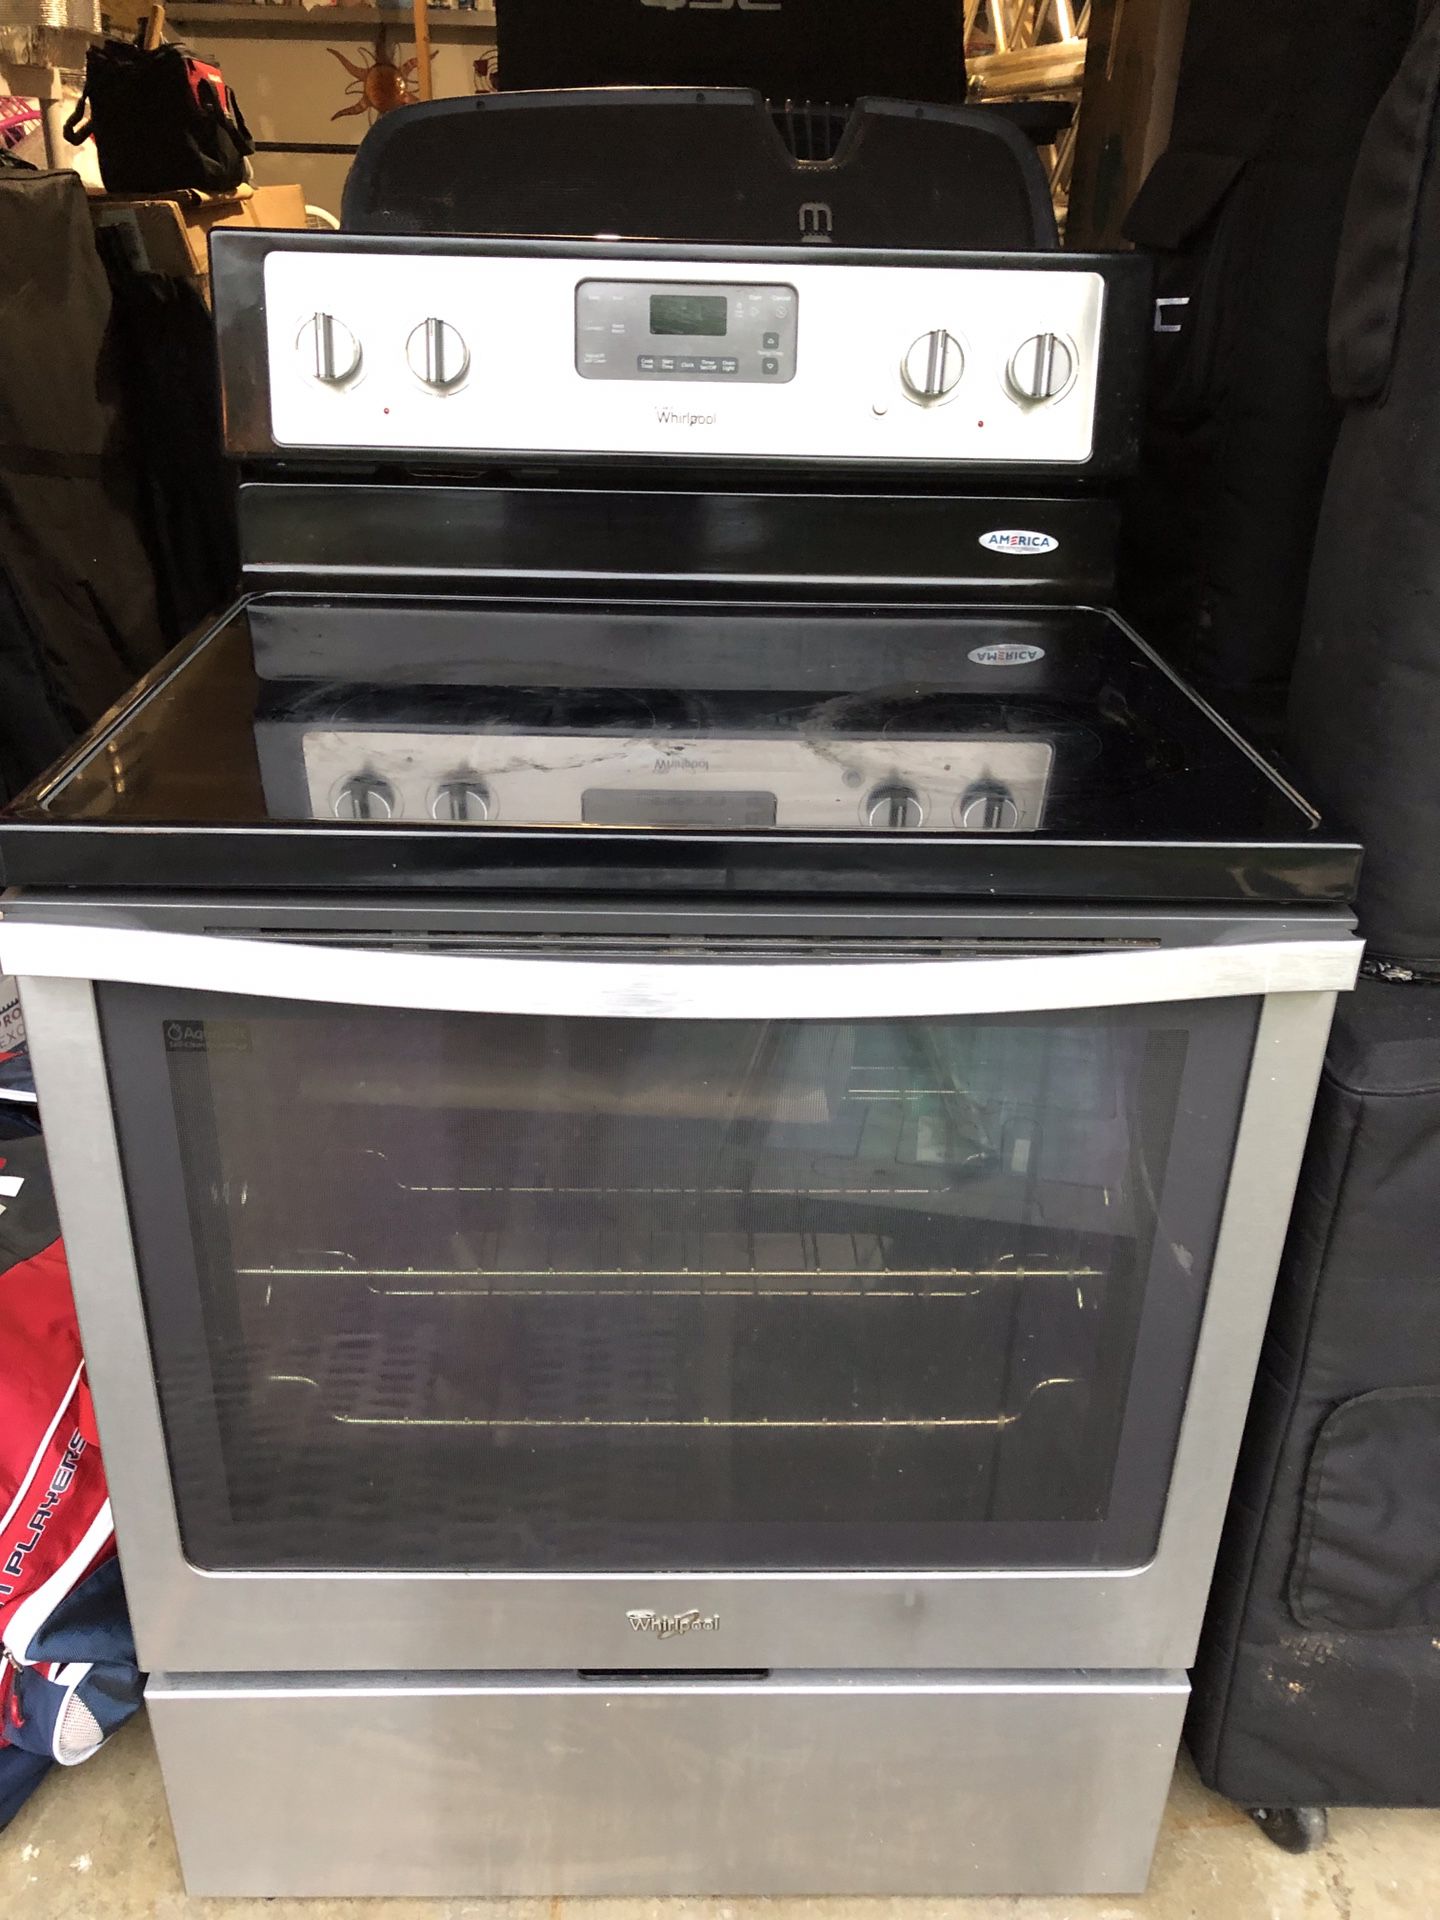 Electric range cooker plus microwave in excellent condition